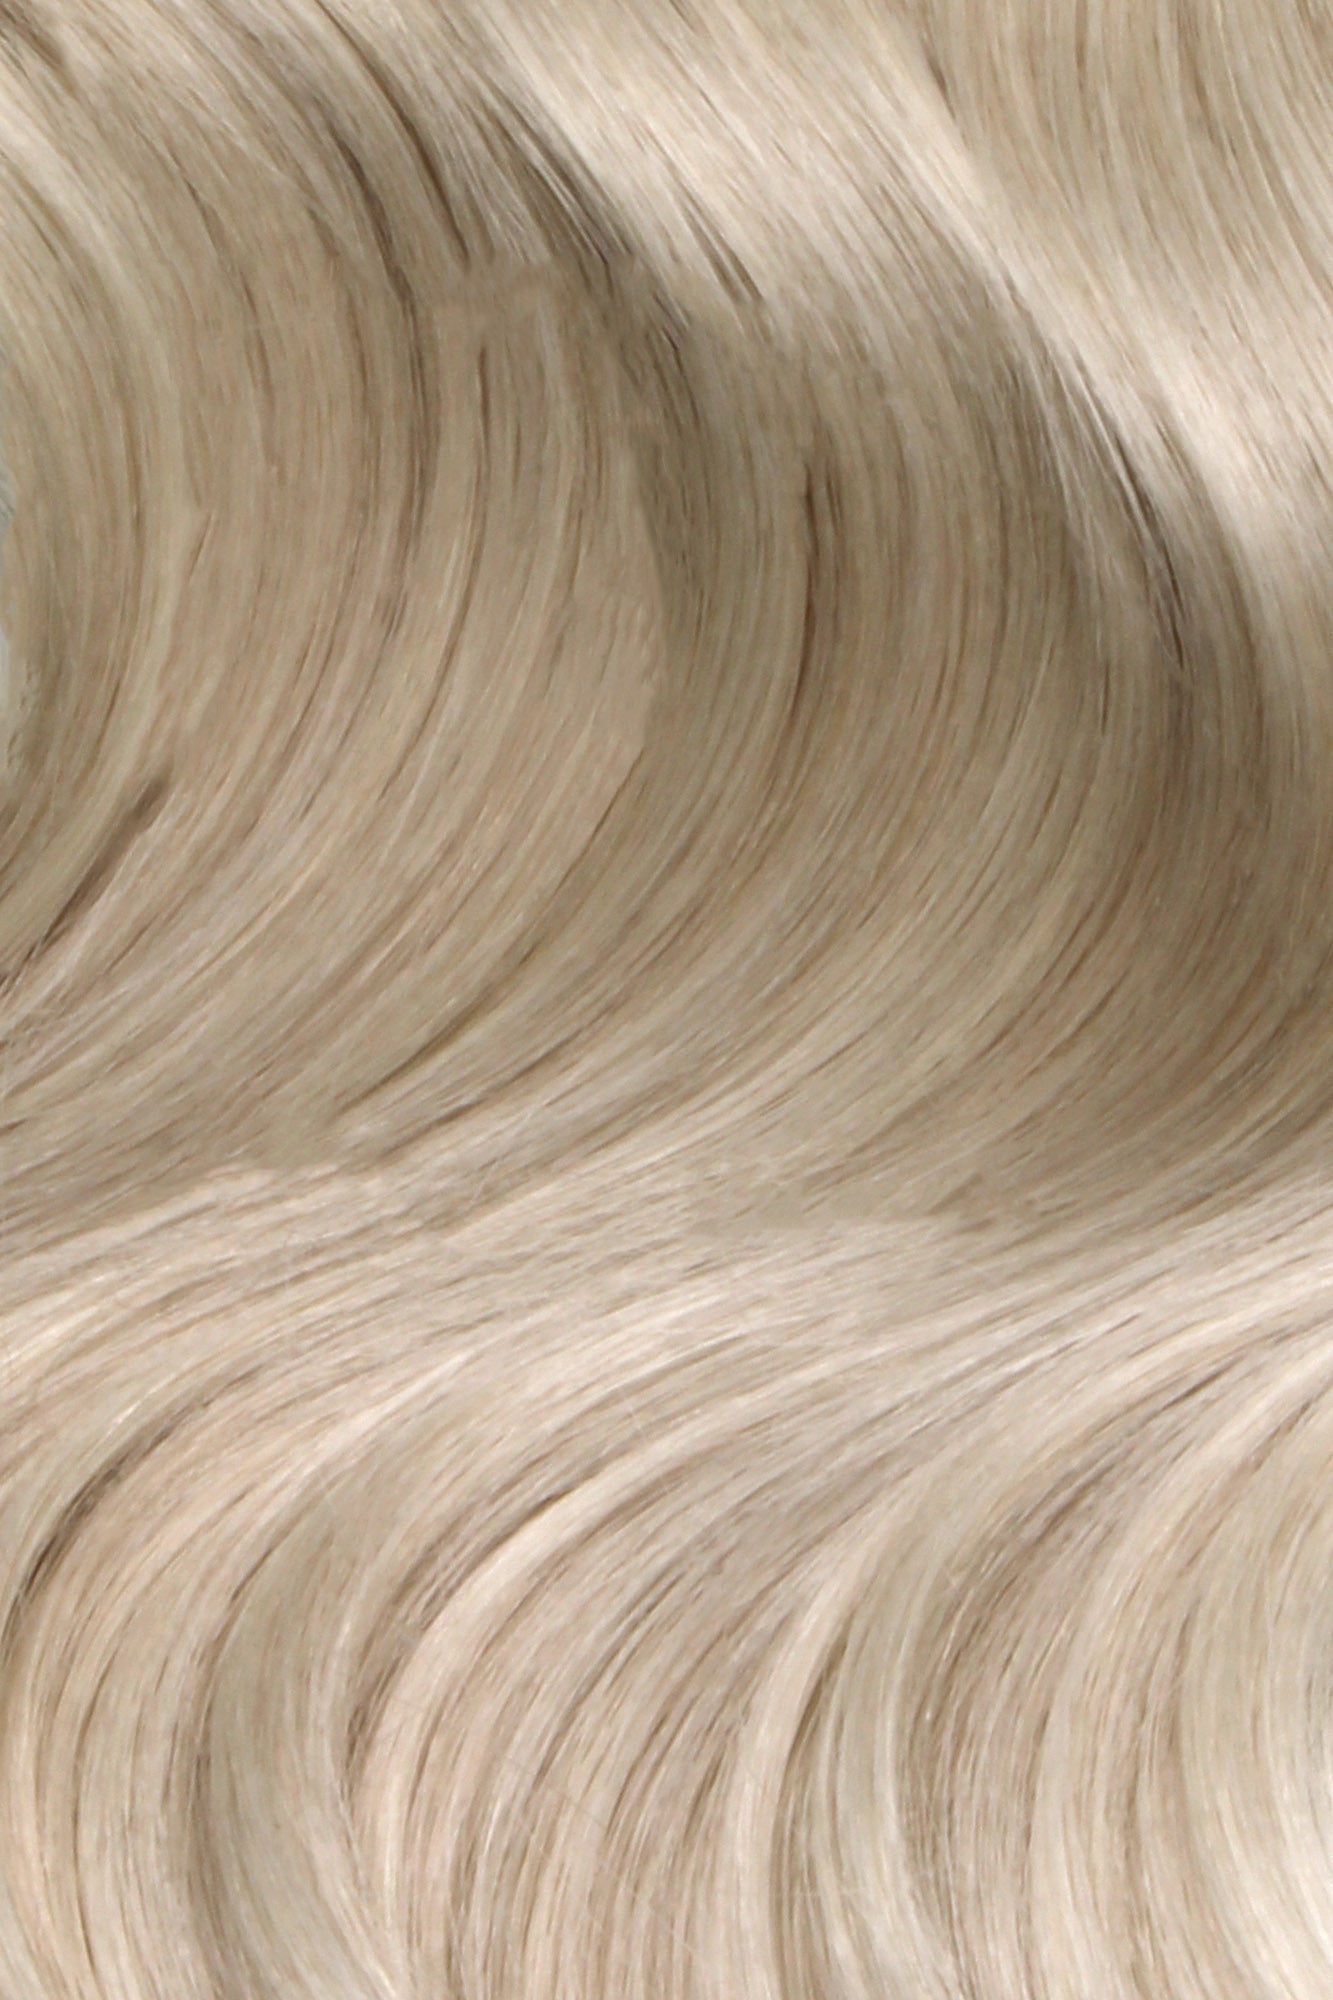 Tiny Tip Bonds 22&quot; - SWAY Hair Extensions Pearl-Blonde: Lightweight, discreet. Made with Italian Keratin for comfort and long-lasting wear. Reusable and compatible with other SWAY Salon Professional Methods